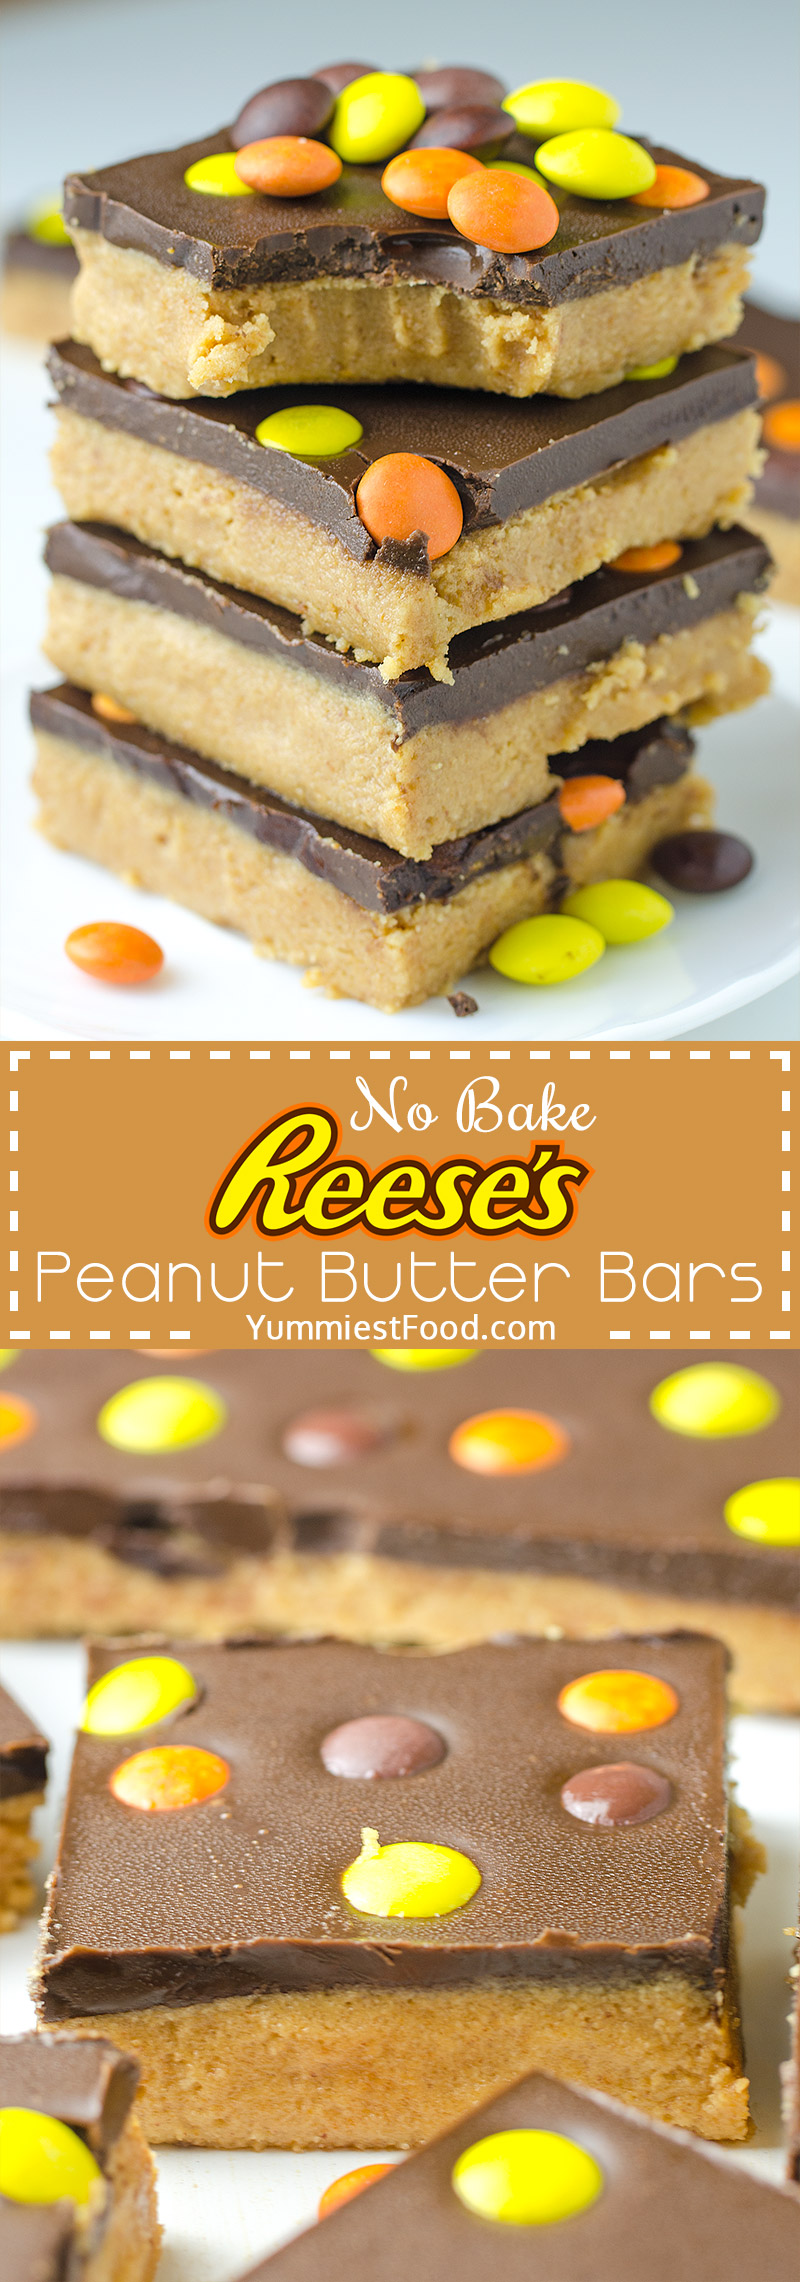 Easy No Bake Reese’s Peanut Butter Bars - Easy, simple and quick no bake dessert recipe with peanut butter and chocolate